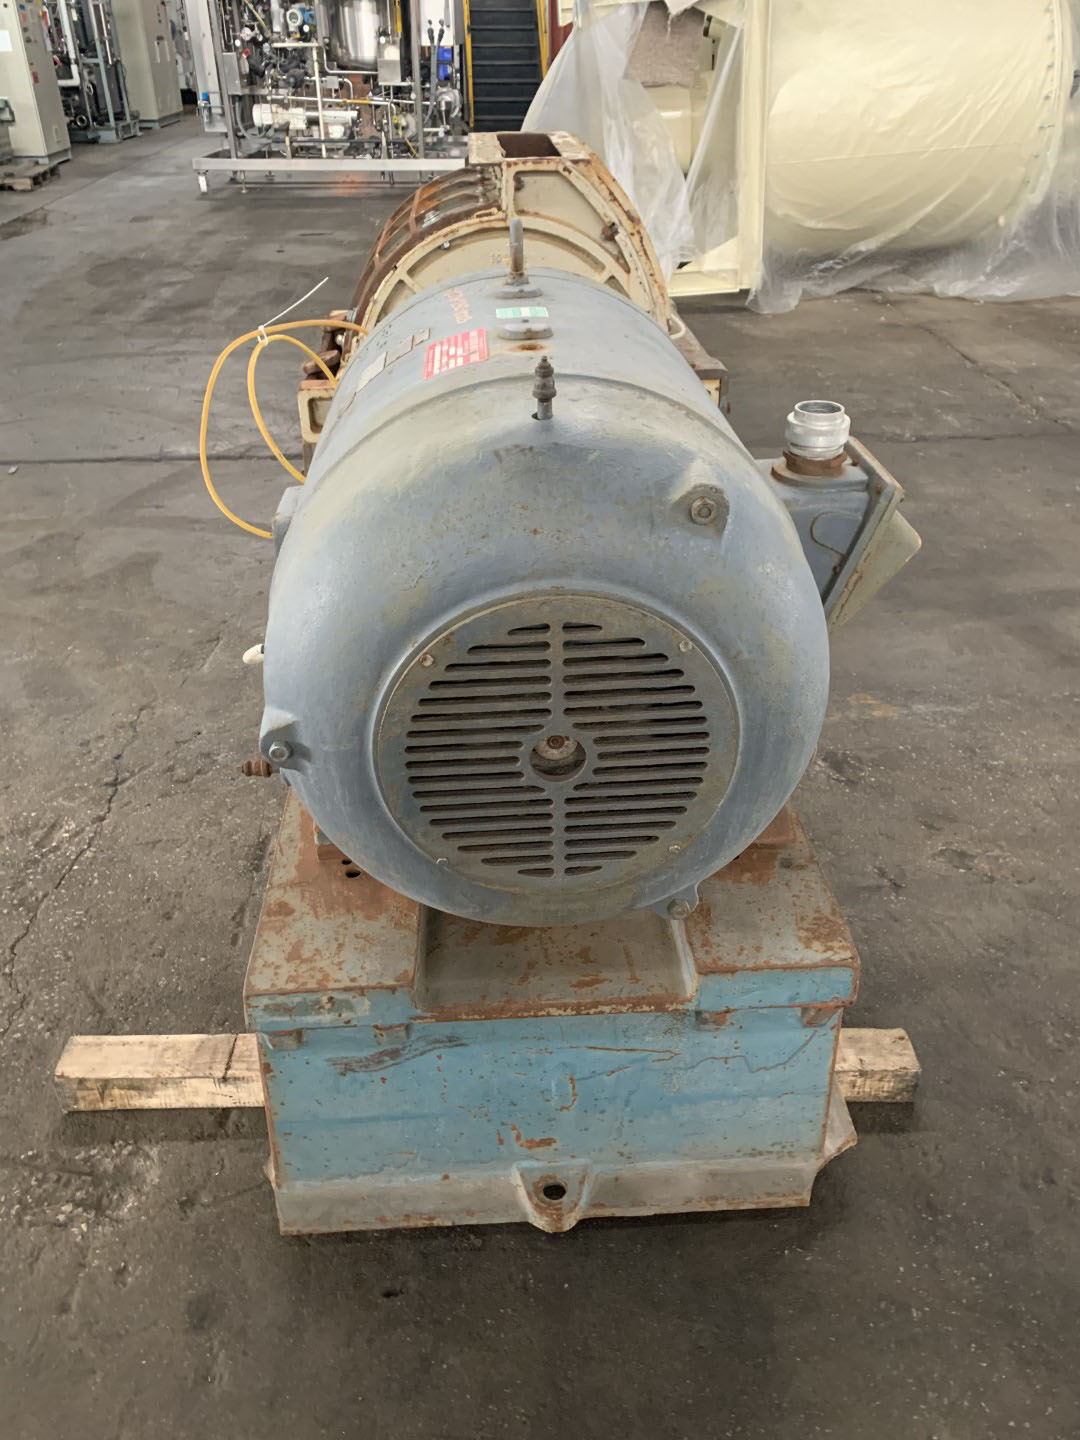 Jacobson Hammer Mill, C/S, 125 HP